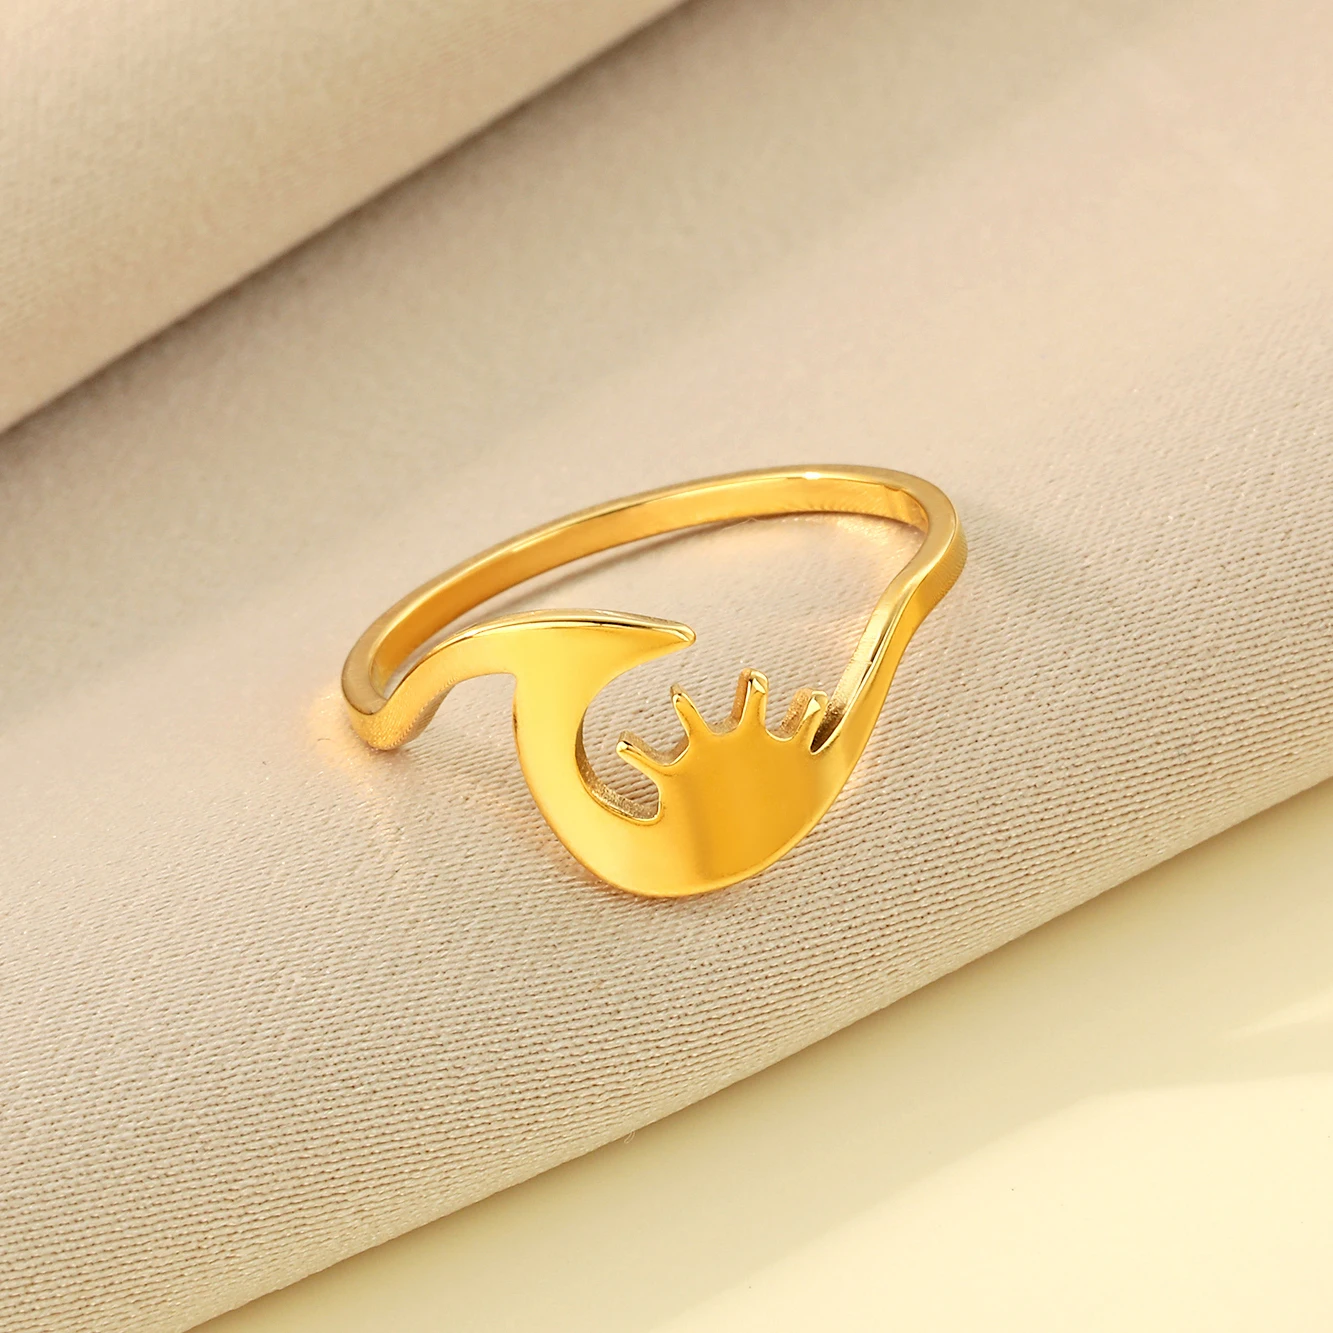 

CHENHXUN New Design Petite Dainty Ring Thumb Ring Oxidized Plain Ring Stainless Steel for Men and Women